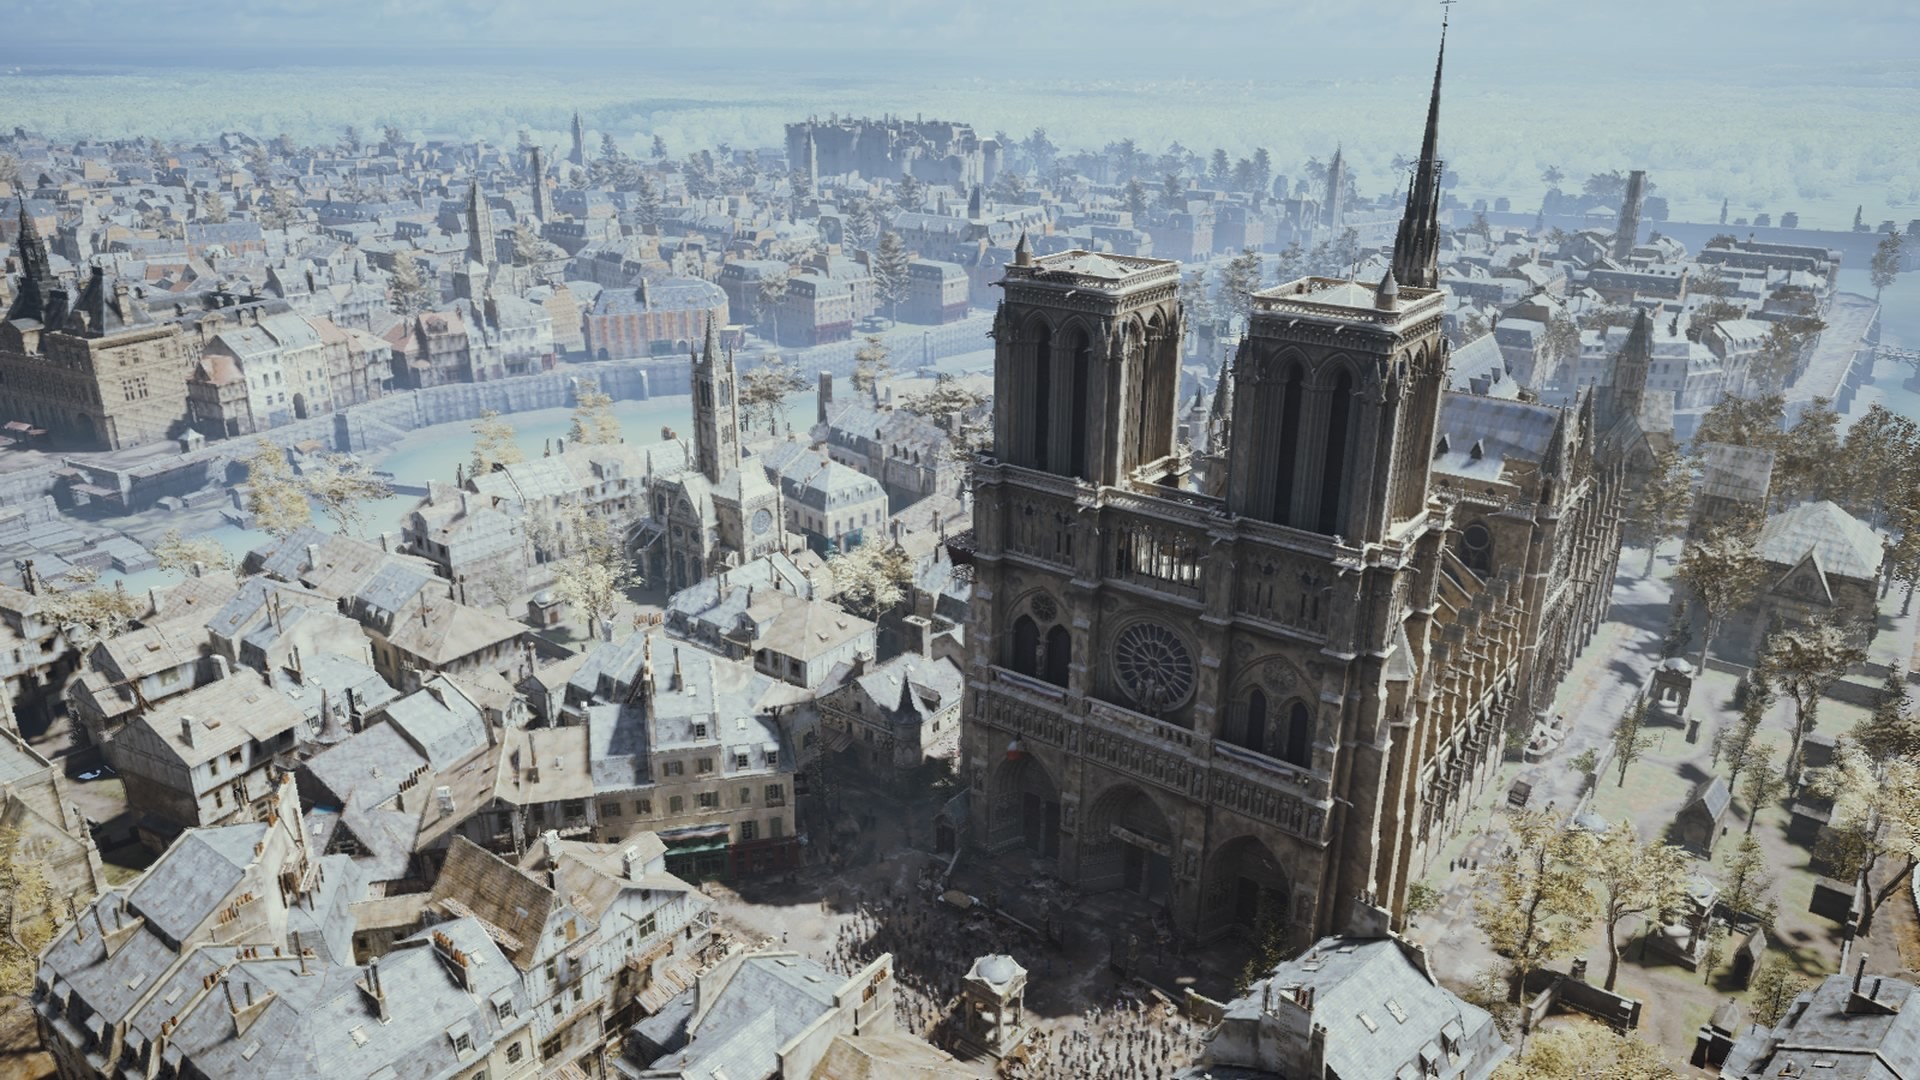 General 1920x1080 Assassin's Creed: Unity video games Assassin's Creed Paris Notre-Dame Ubisoft PC gaming cityscape